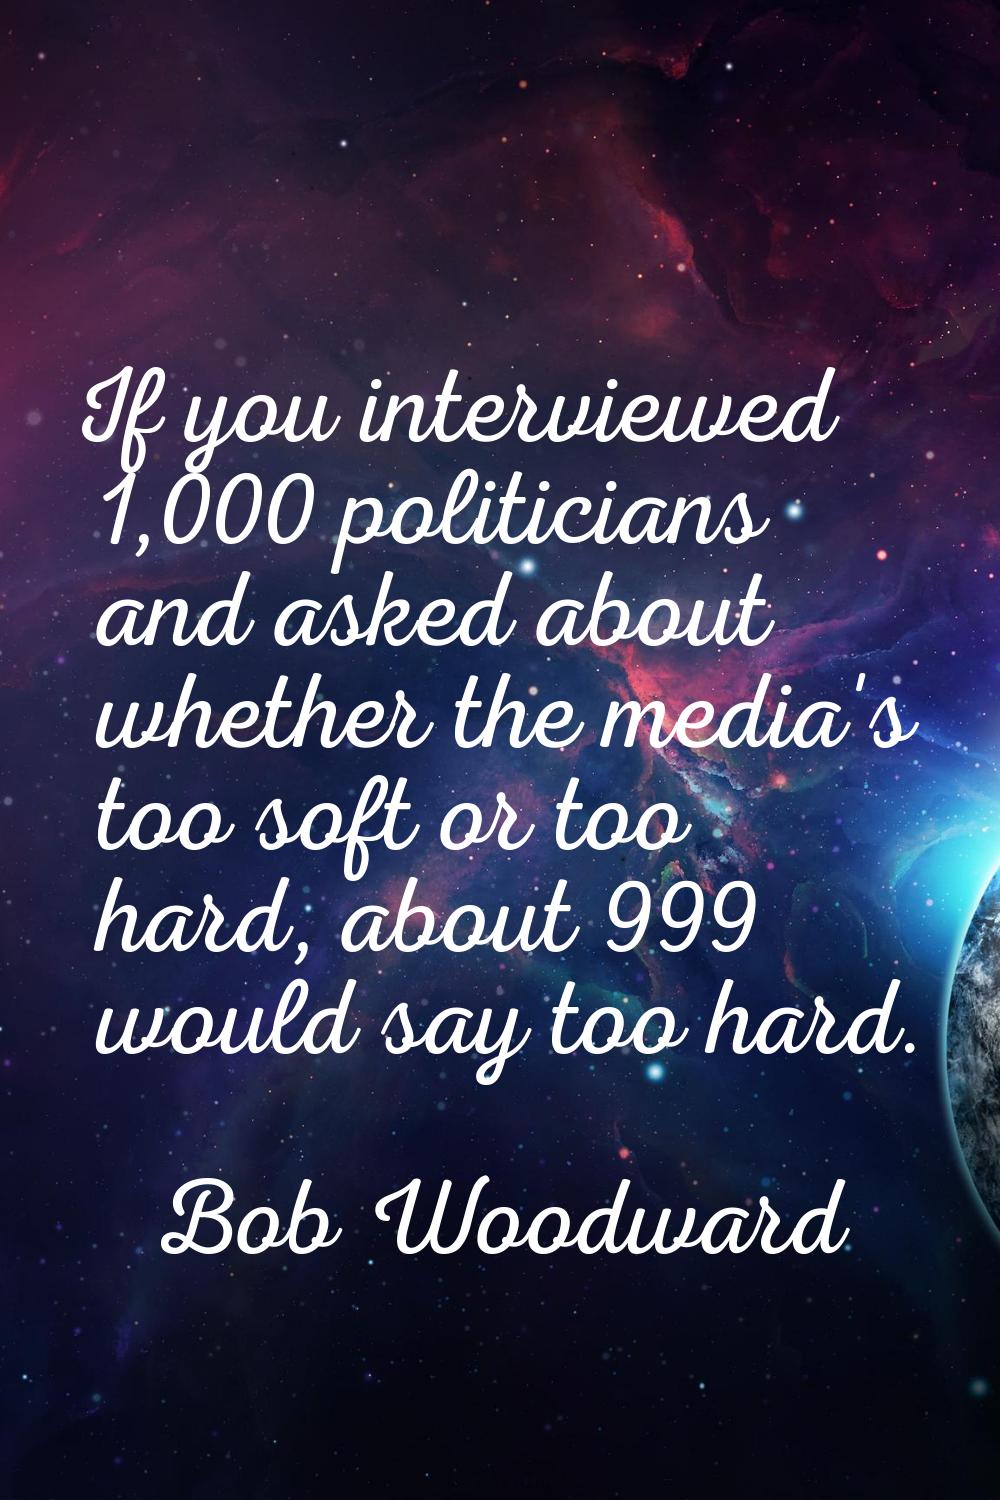 If you interviewed 1,000 politicians and asked about whether the media's too soft or too hard, abou